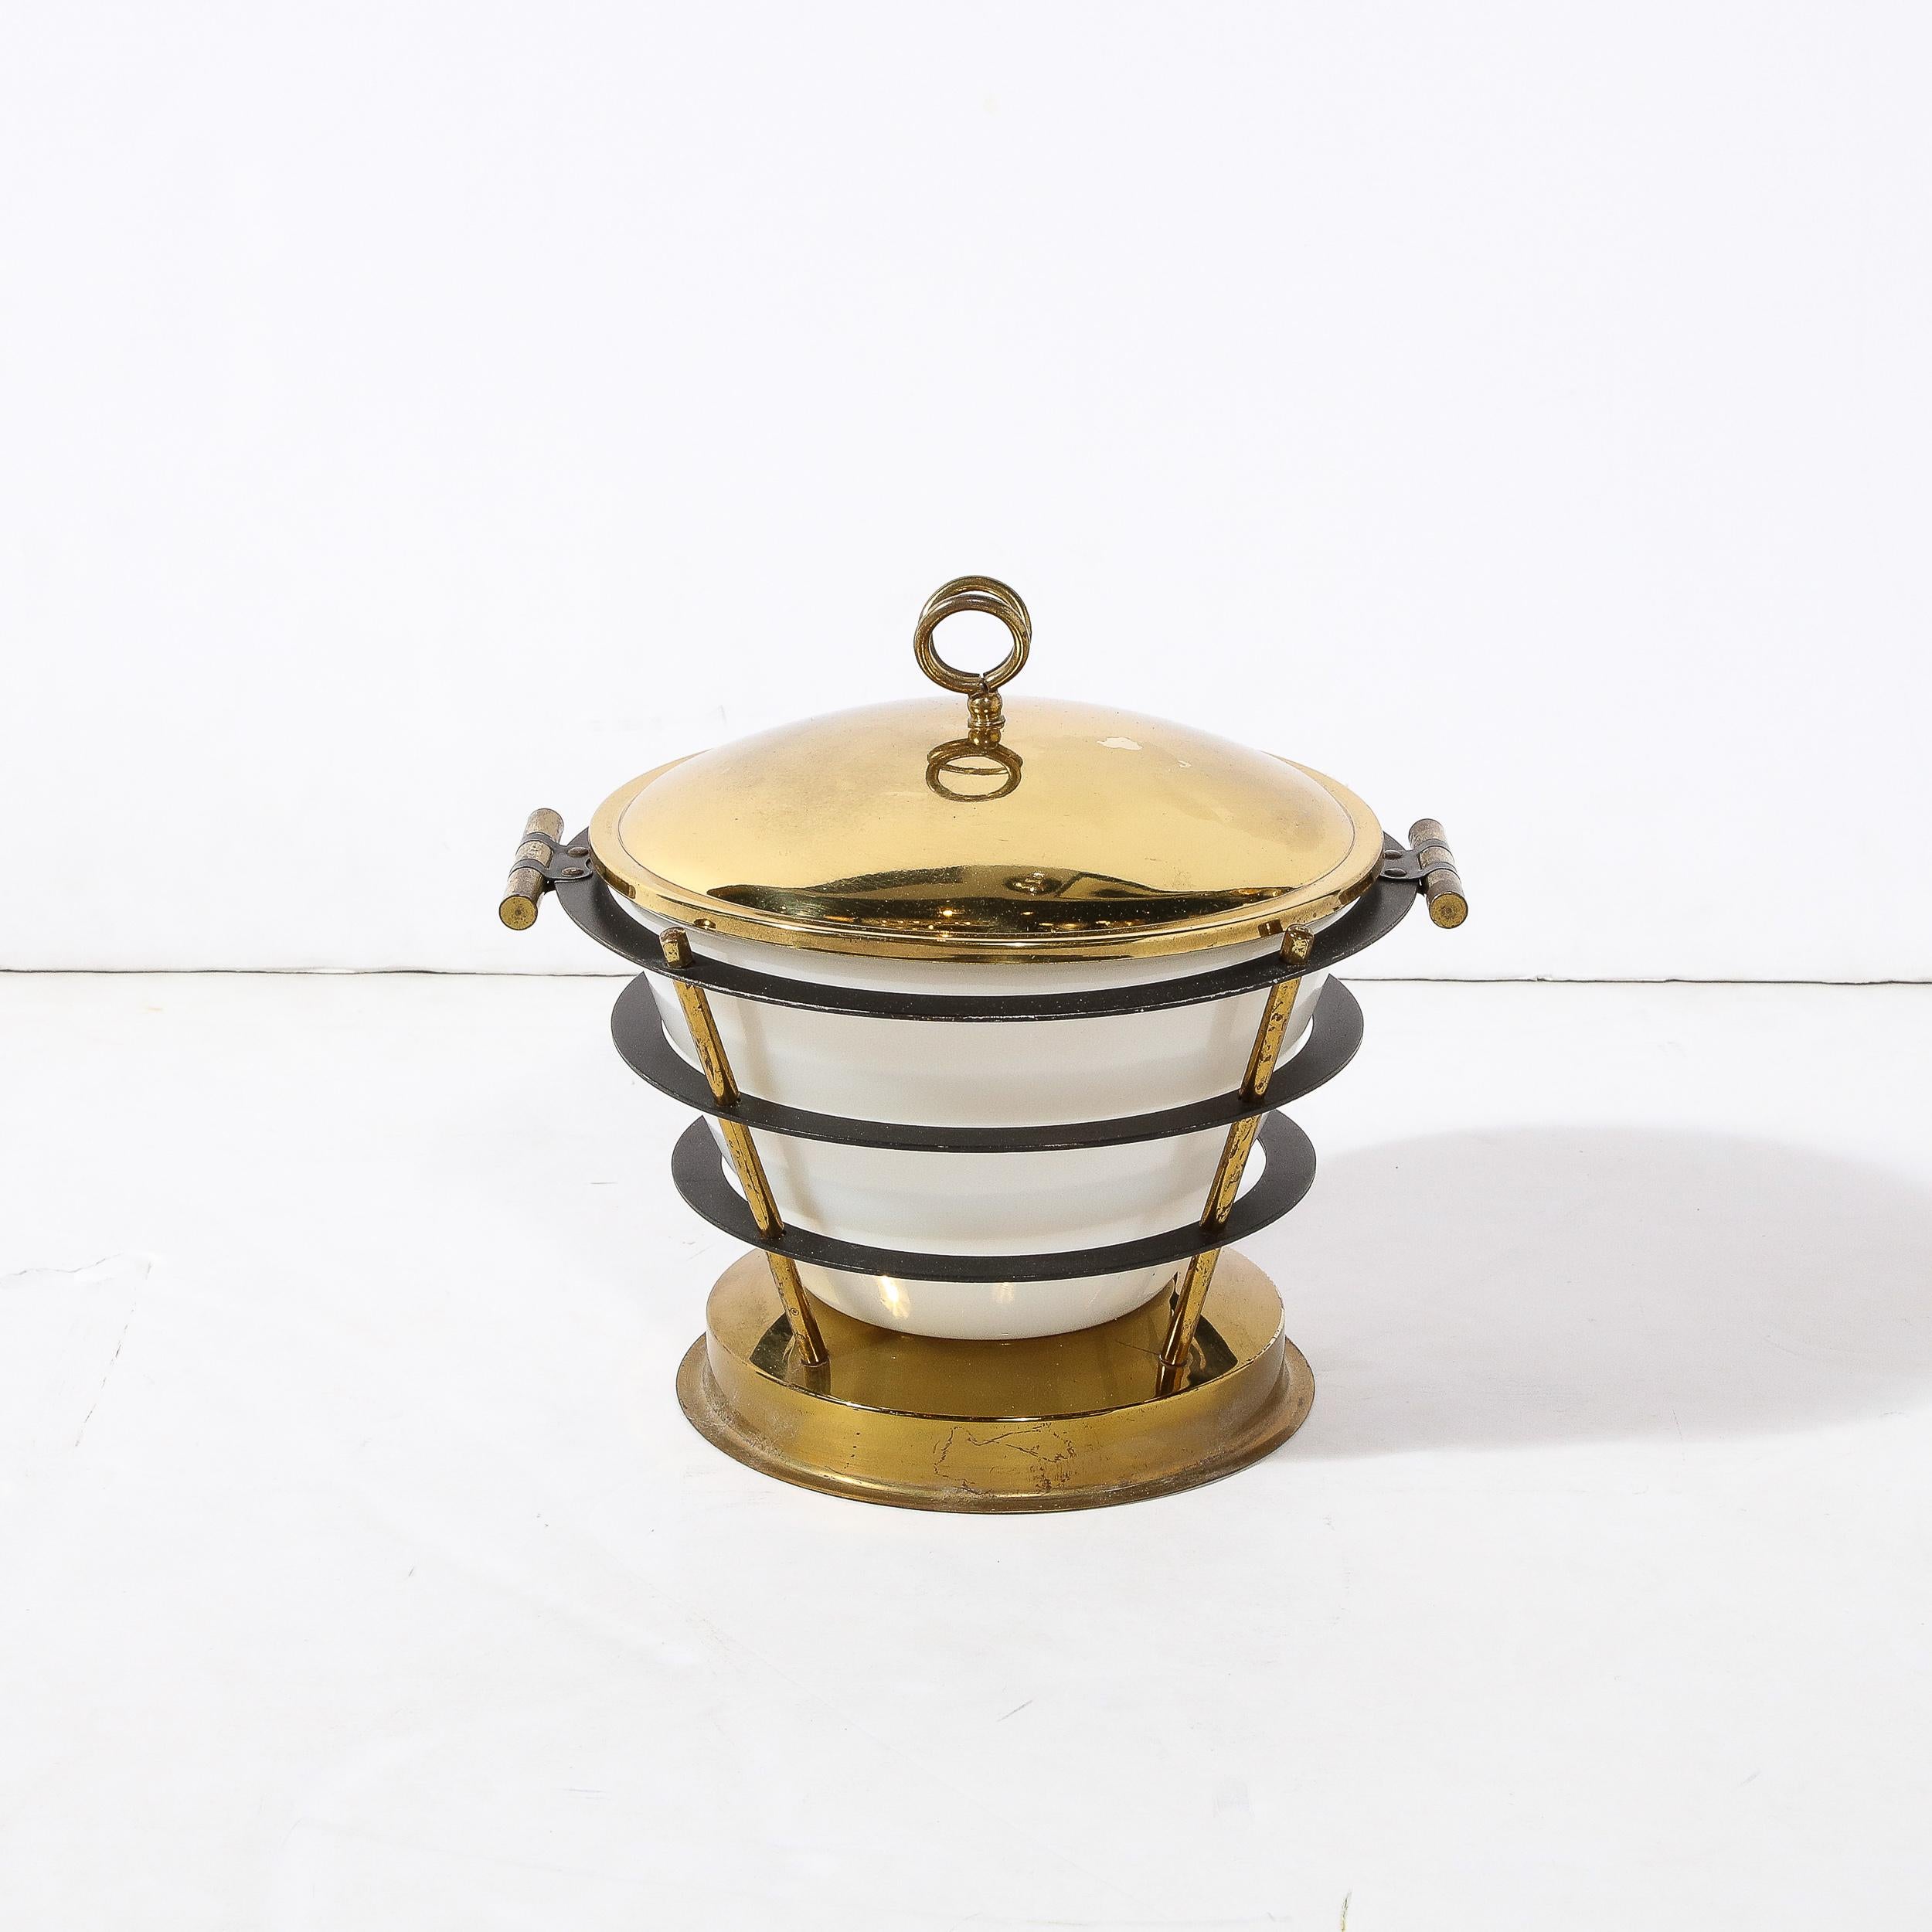 This elegant and sculptural ice bucket was realized in Italy, circa 1960. It offers a circular faceted polished brass base with three cylindrical supports tracing the exterior of the conical white glass center. The brass supports pierce through